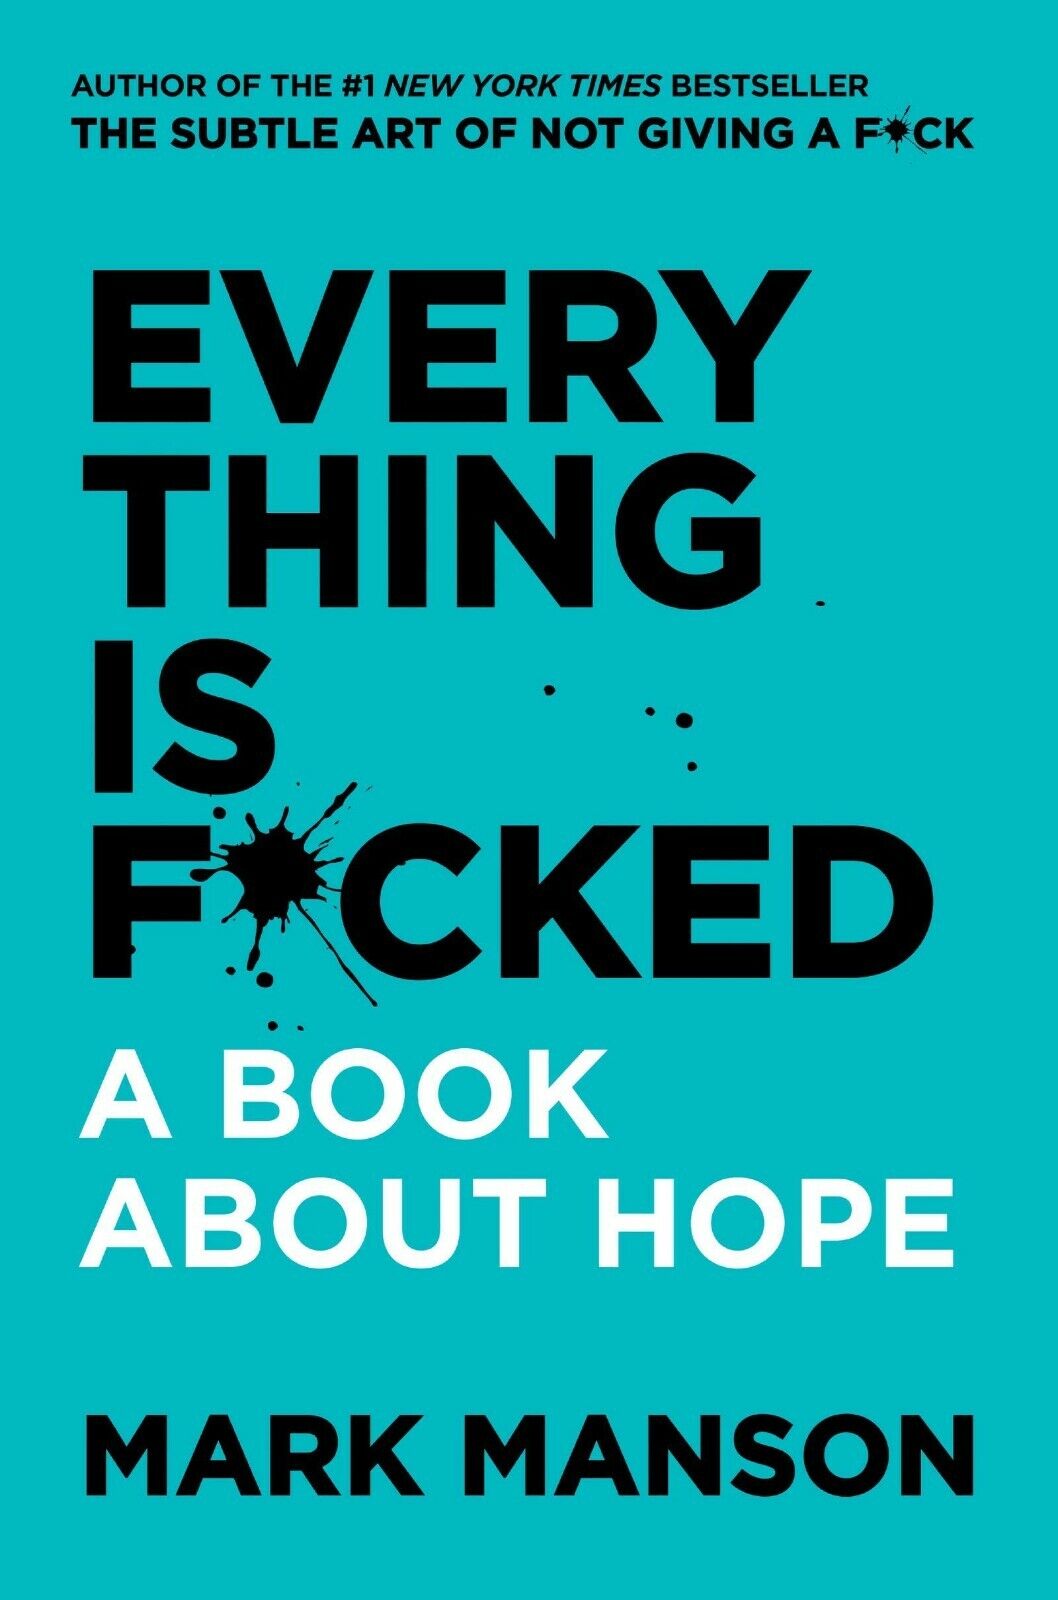 NEW Everything Is Fcked Subtle Art of Not Giving Fck, Unfck Yourself 3 Books Set Без бренда - фотография #2